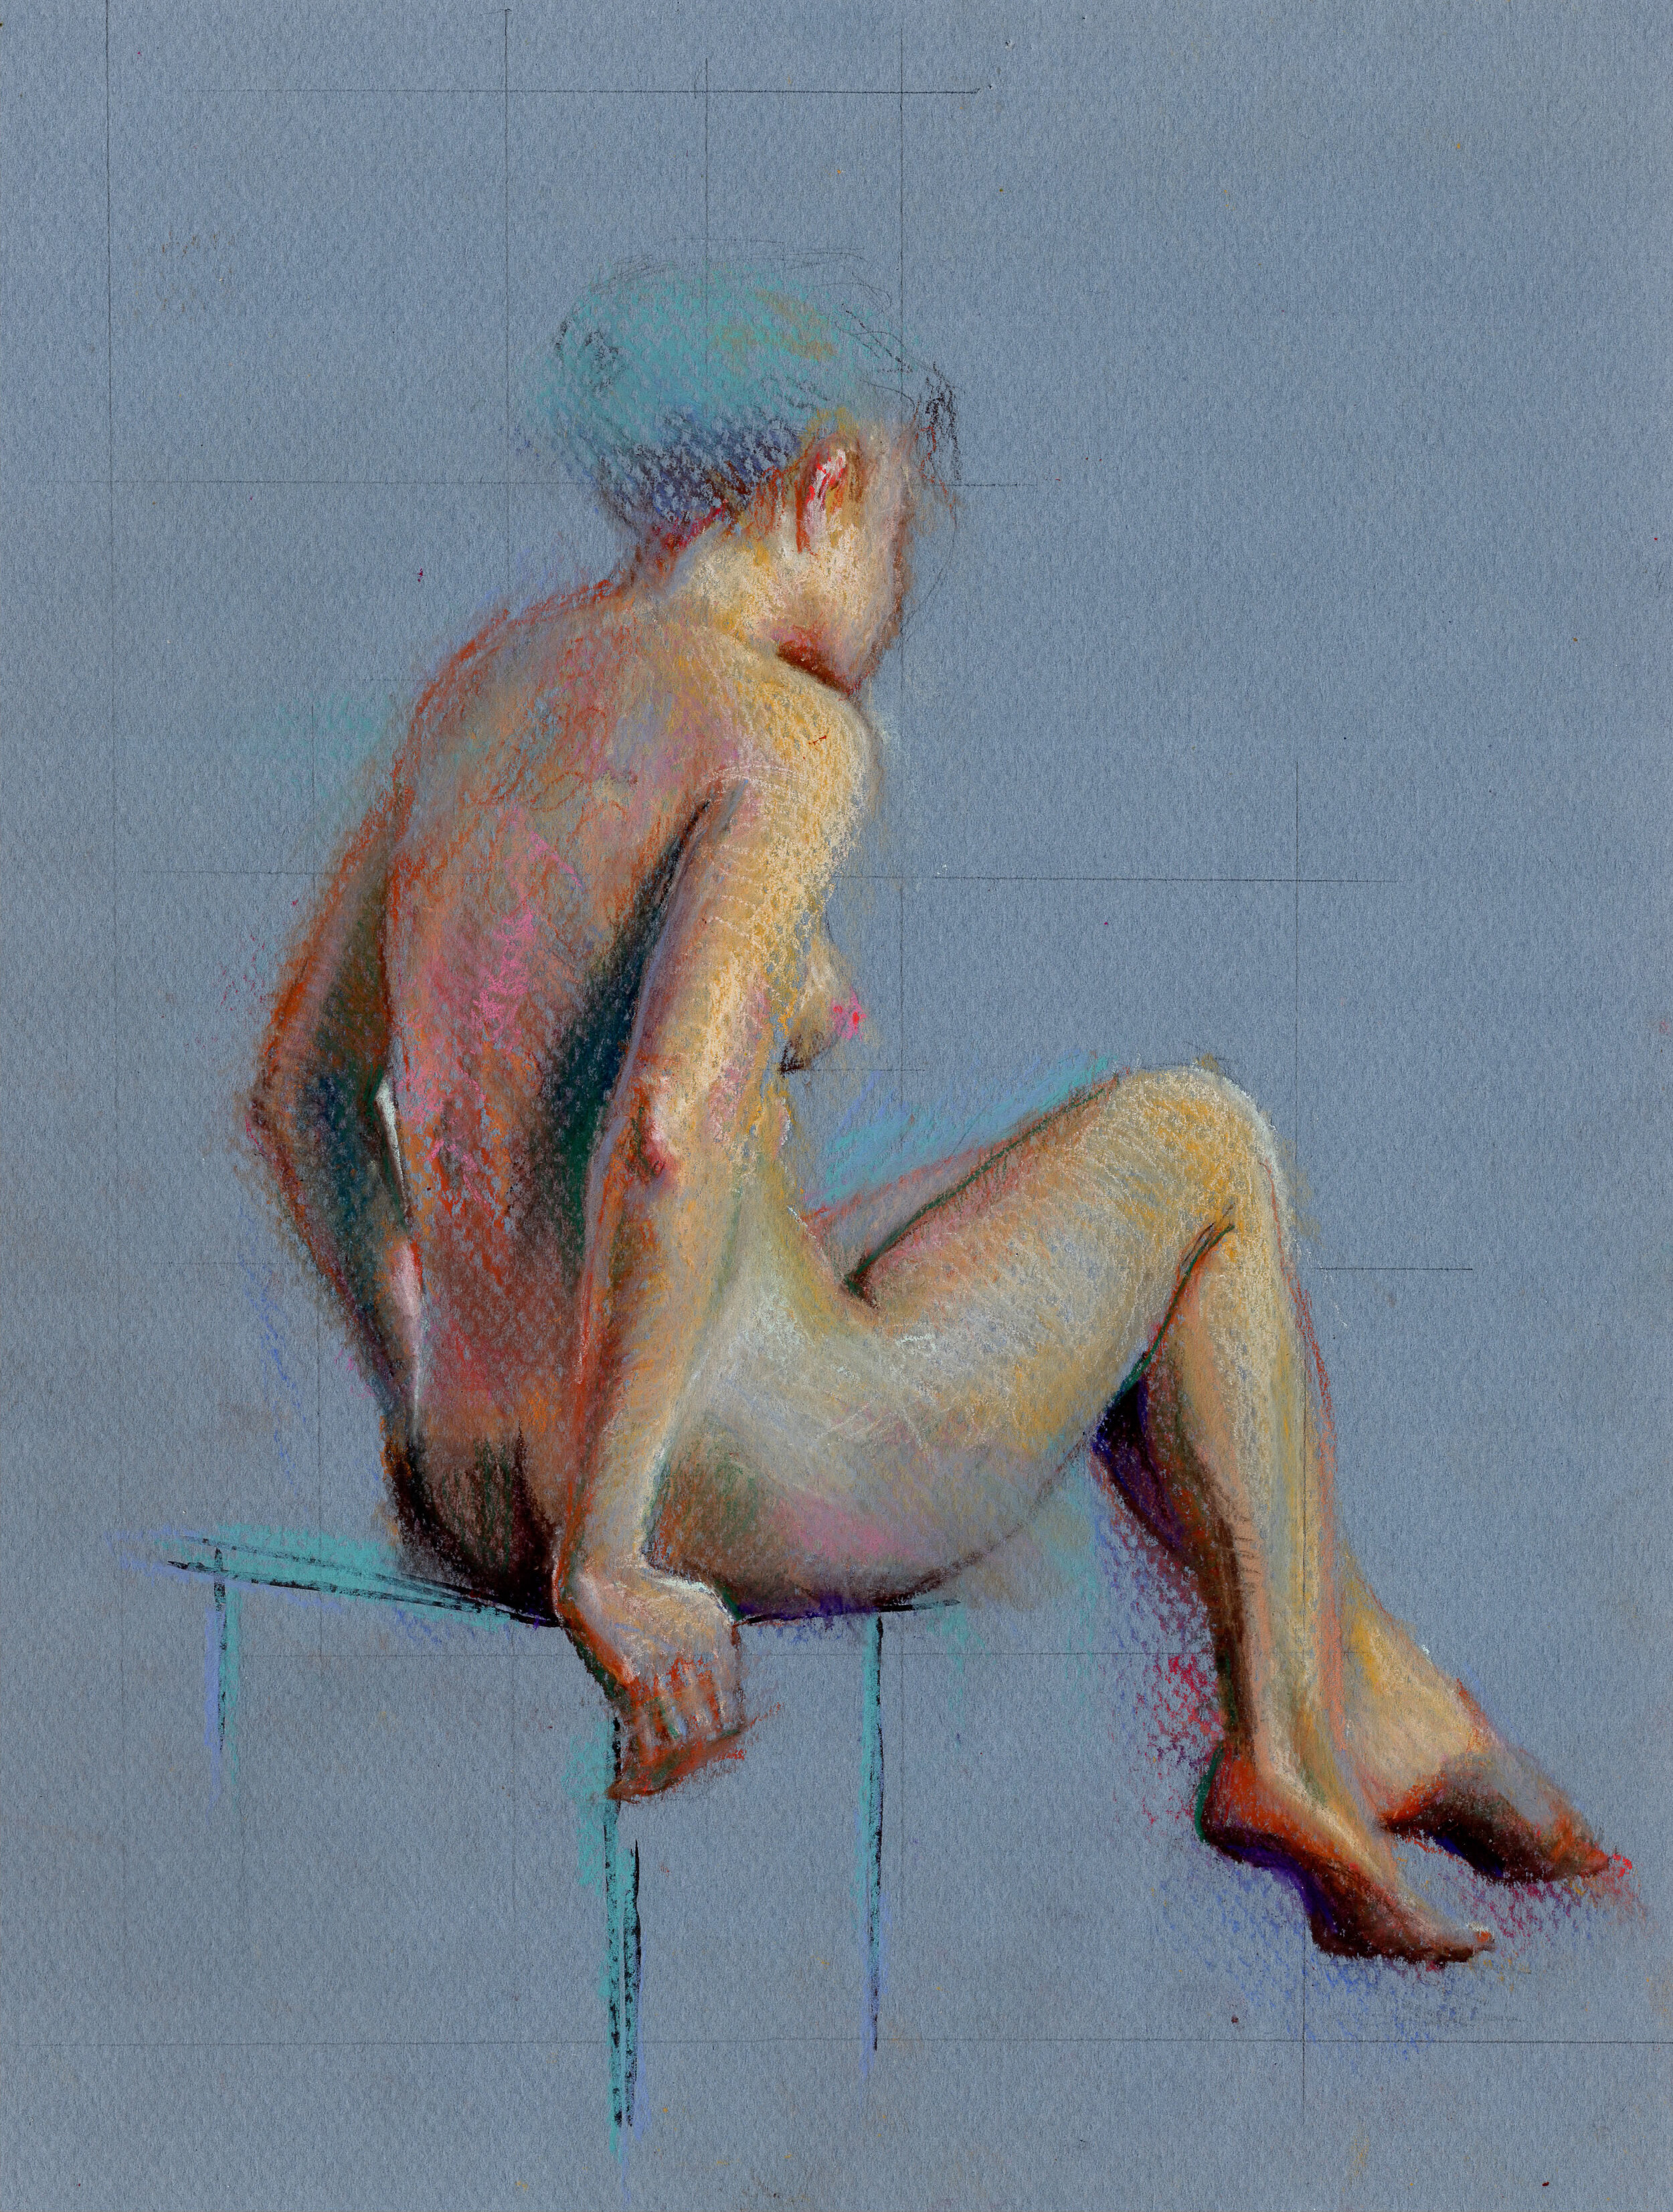 Nude in Pastels, Pastel on toned paper, 9” by 12”, 2019